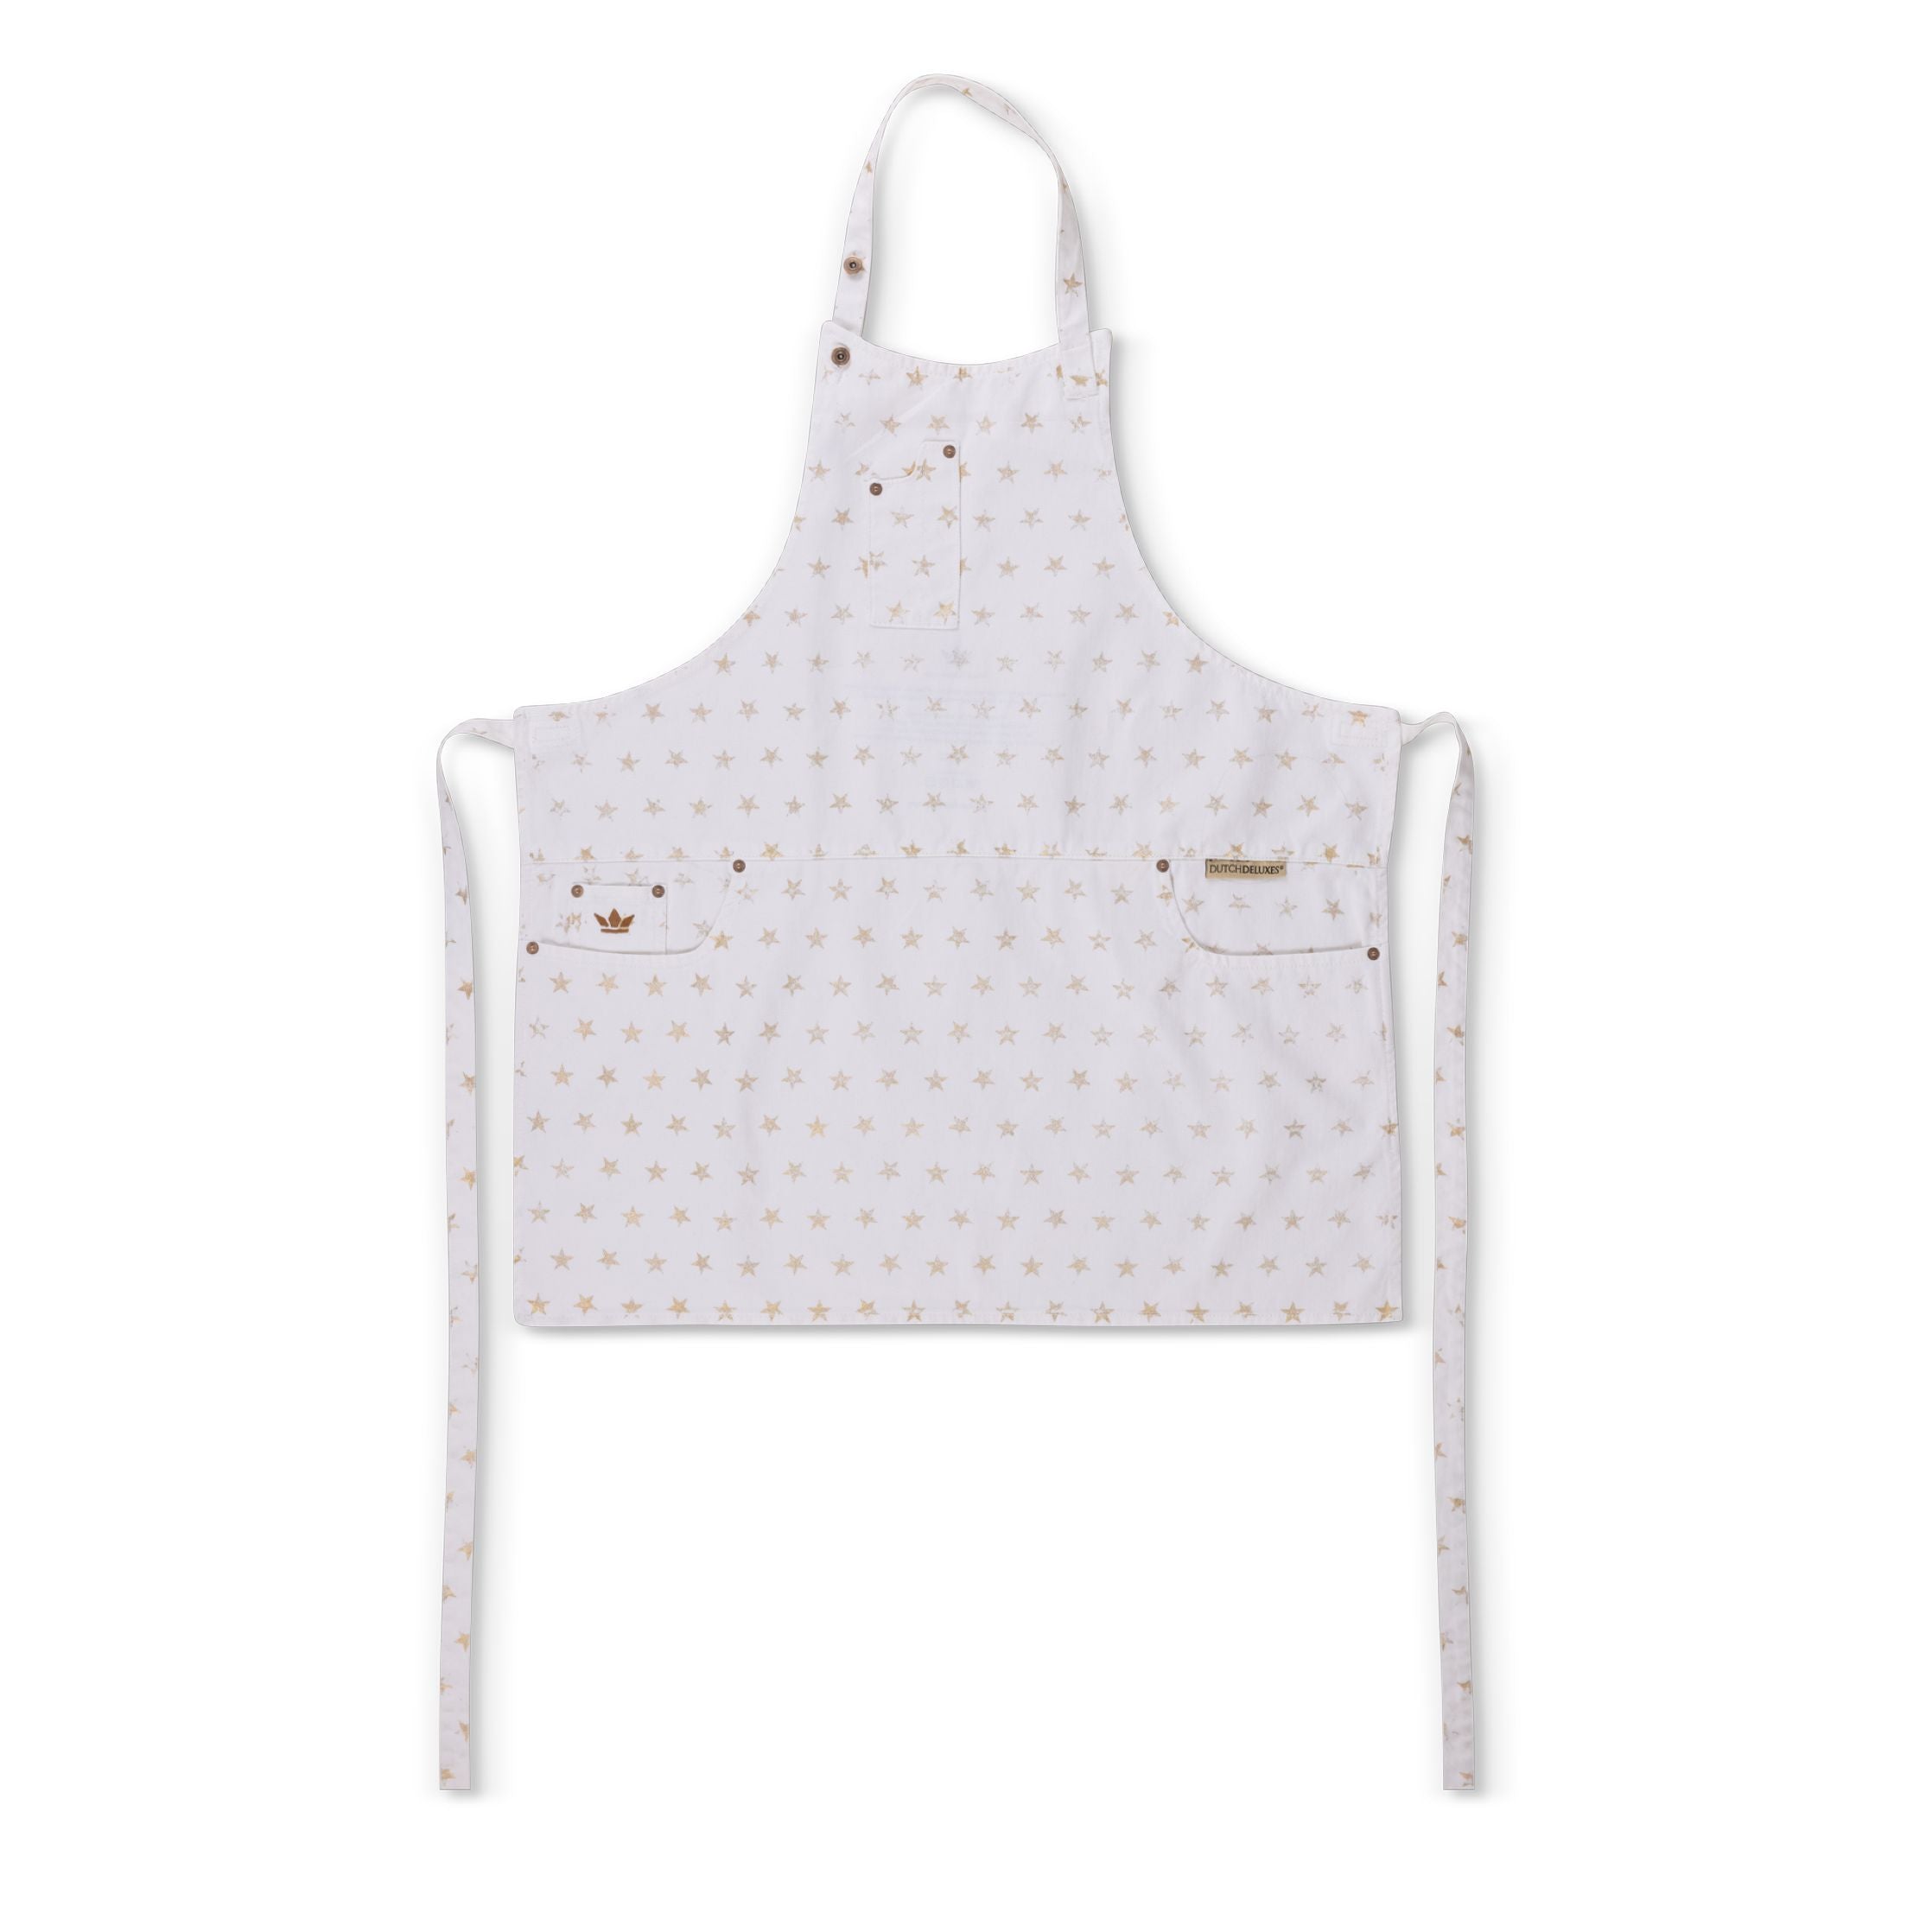 Dutchdeluxes Five Pocket Apron Slim Fit, Starry White